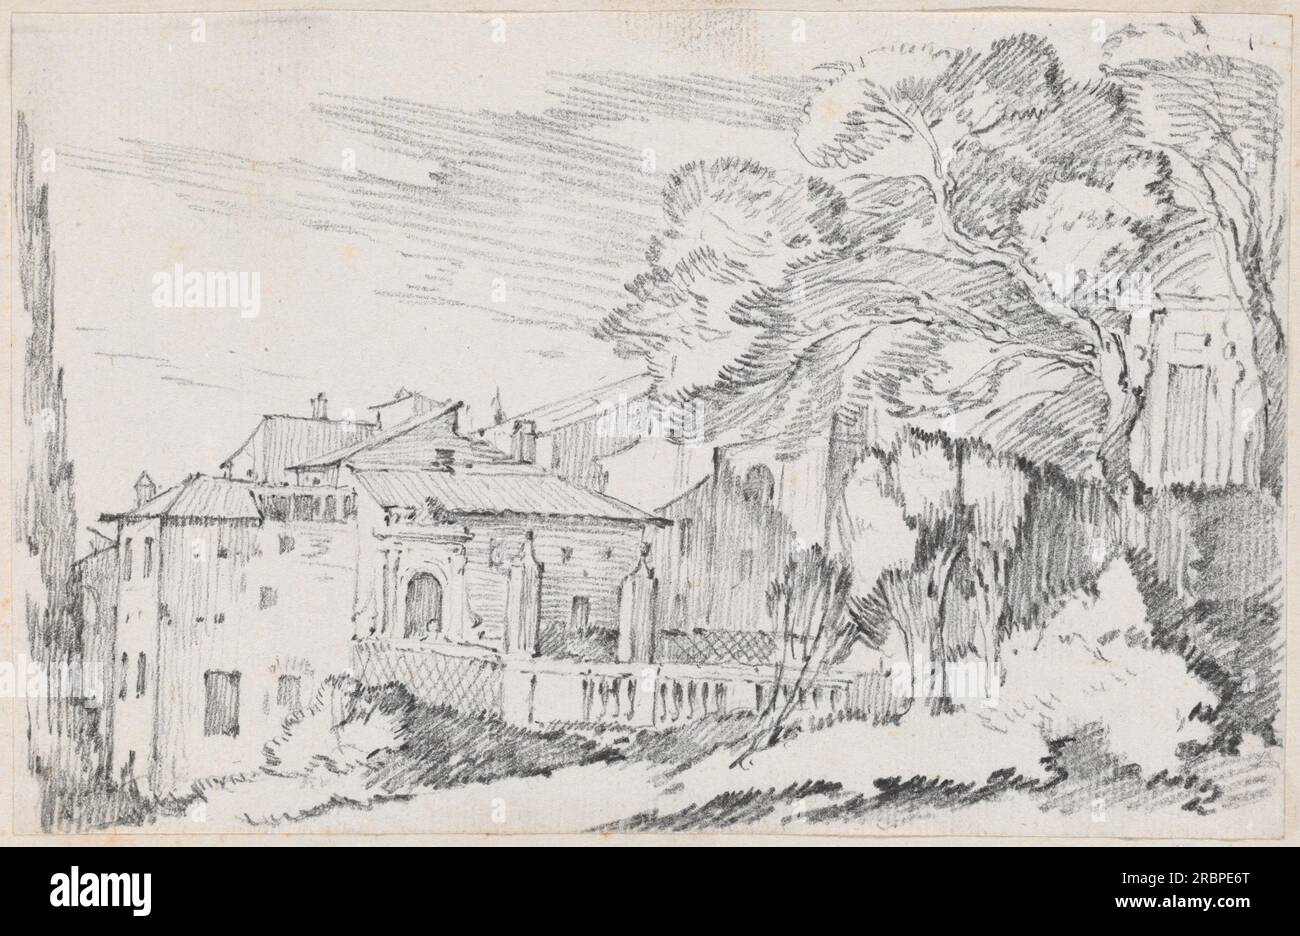 'Joseph-Marie Vien, Houses and a Garden on a Hillside in Italy, 1744/1750, graphite on laid paper, sheet: 11.6 x 18 cm (4 9/16 x 7 1/16 in.) page size: 42.5 x 27.7 cm (16 3/4 x 10 7/8 in.), Mark J. Millard Architectural Collection, 1983.49.188' Stock Photo